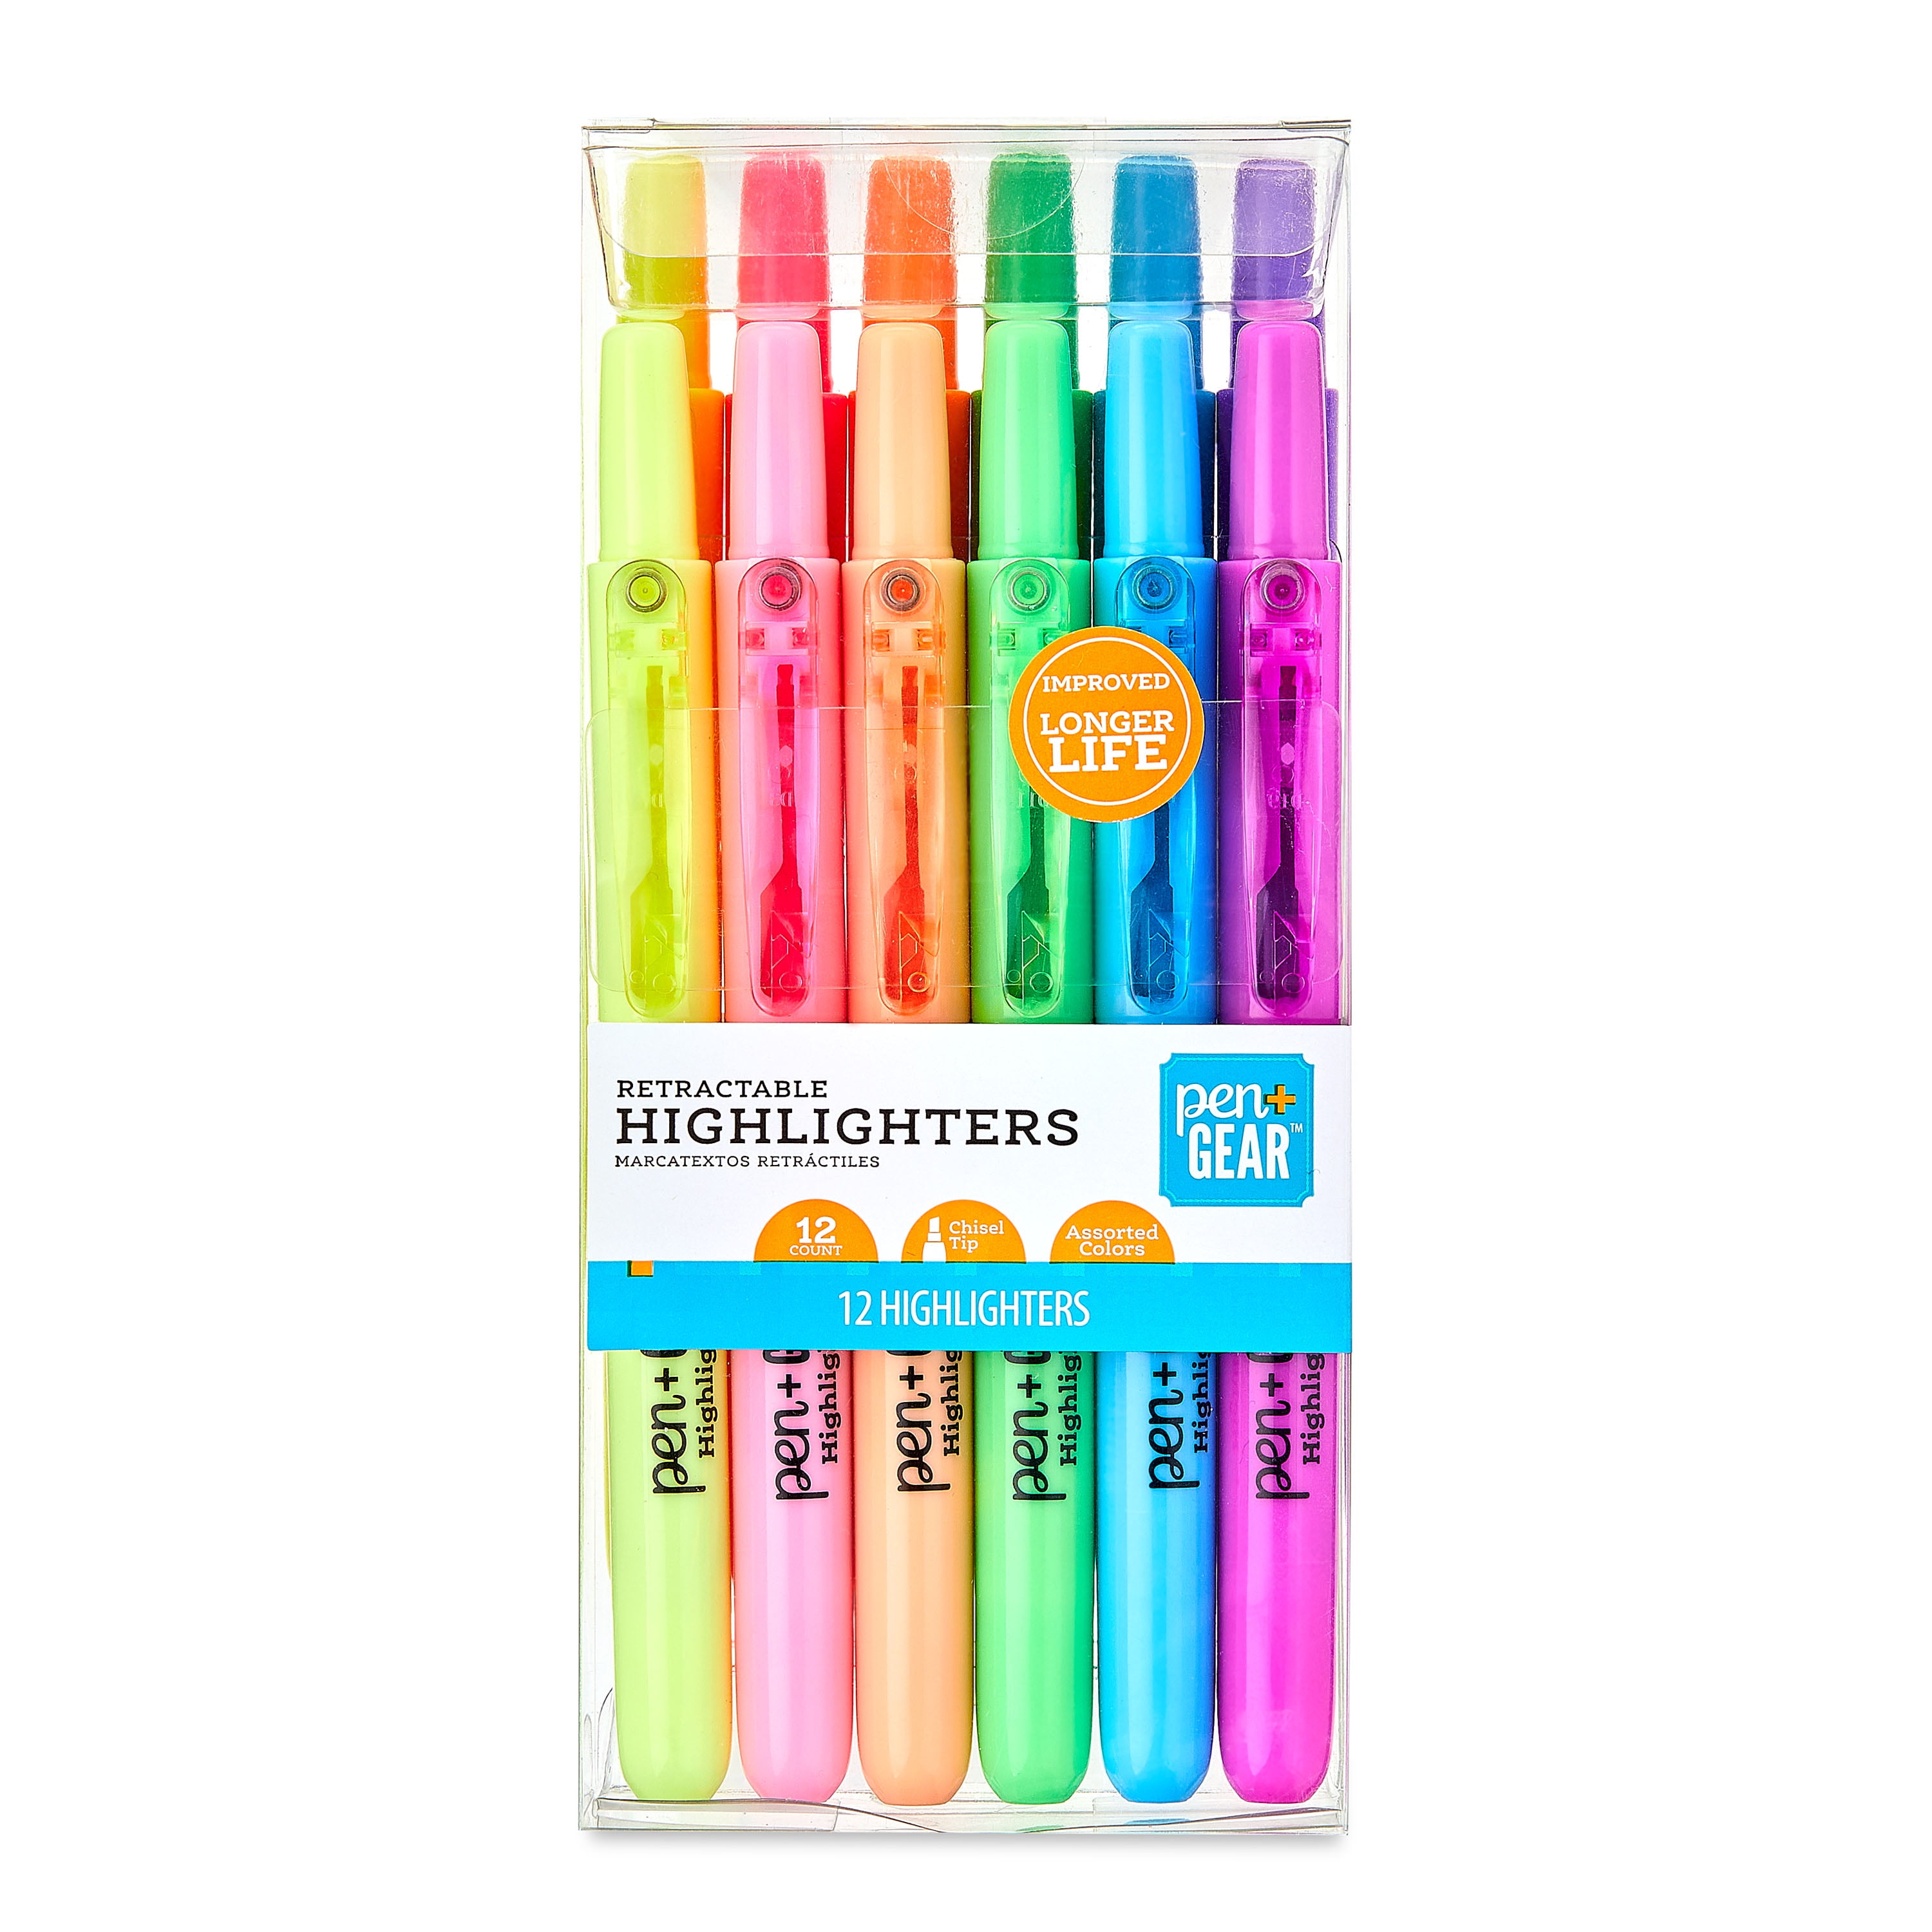 TWOHANDS Highlighters Assorted Colors,Chisel Tip Marker Pens,12-Count,21304